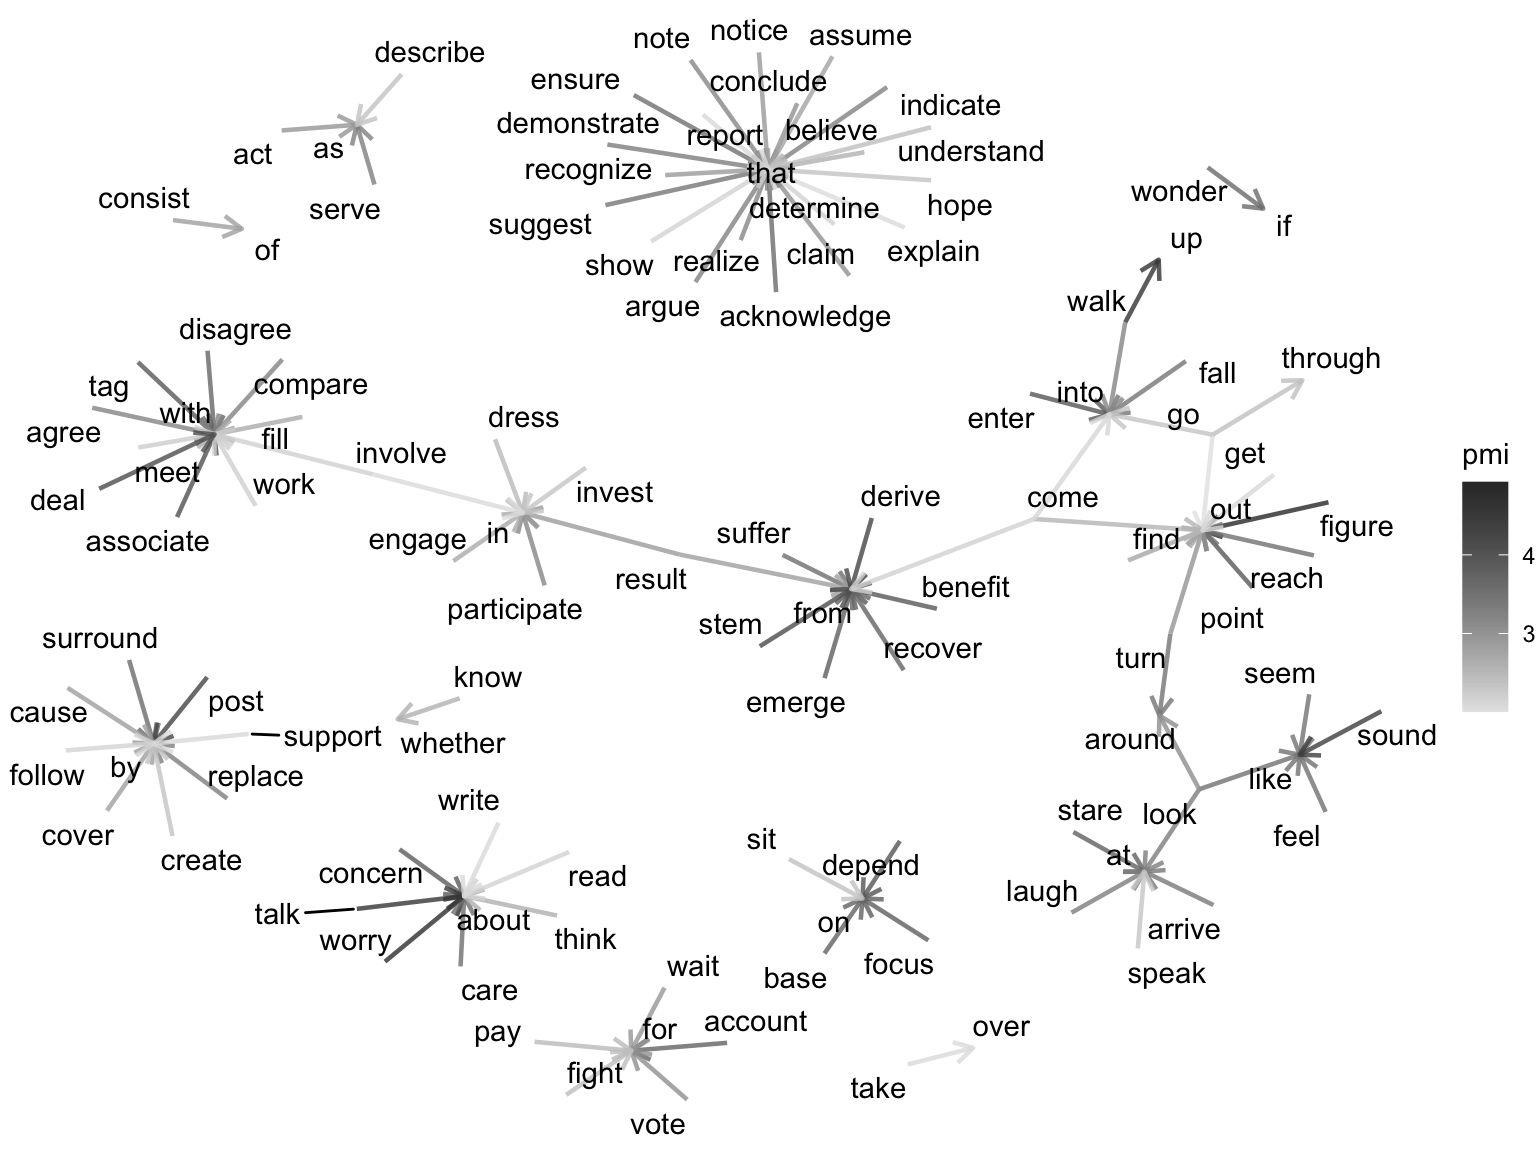 A network plot showing the association between verbs and prepositions in the MASC dataset. The plot shows a network of verbs and prepositions connected by edges with varying thicknesses.